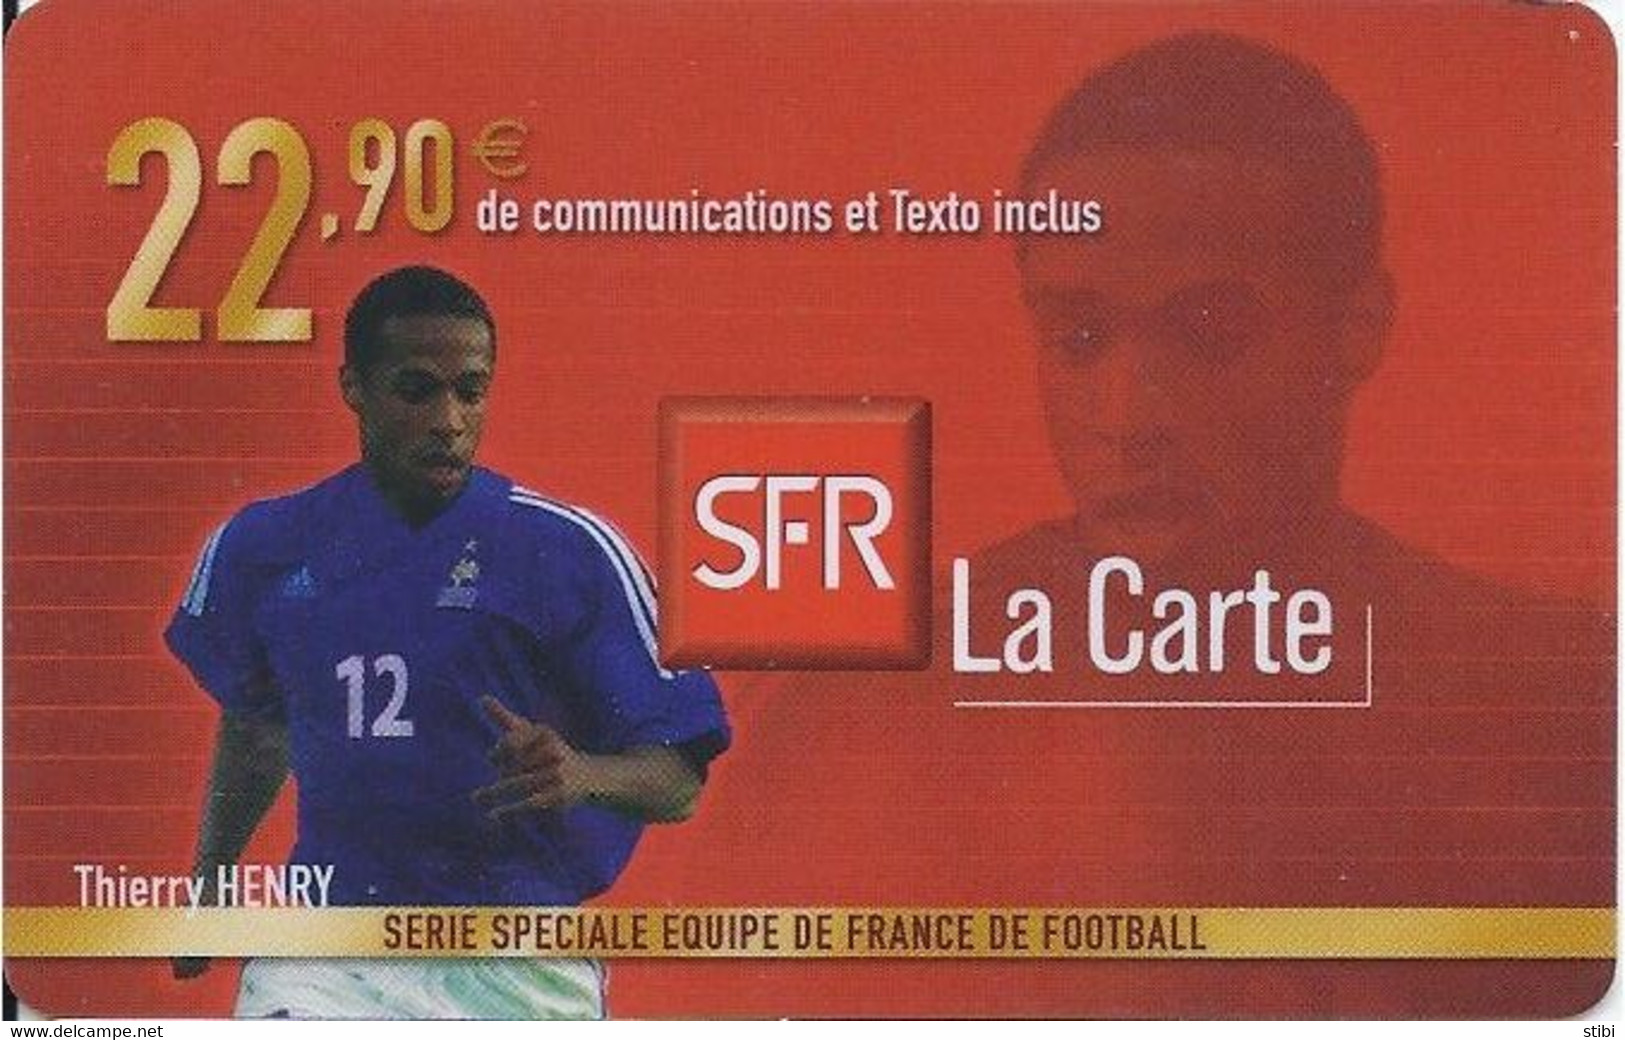 FRANCE - FOOTBALL - THIERRY HENRY - Mobicartes (GSM/SIM)